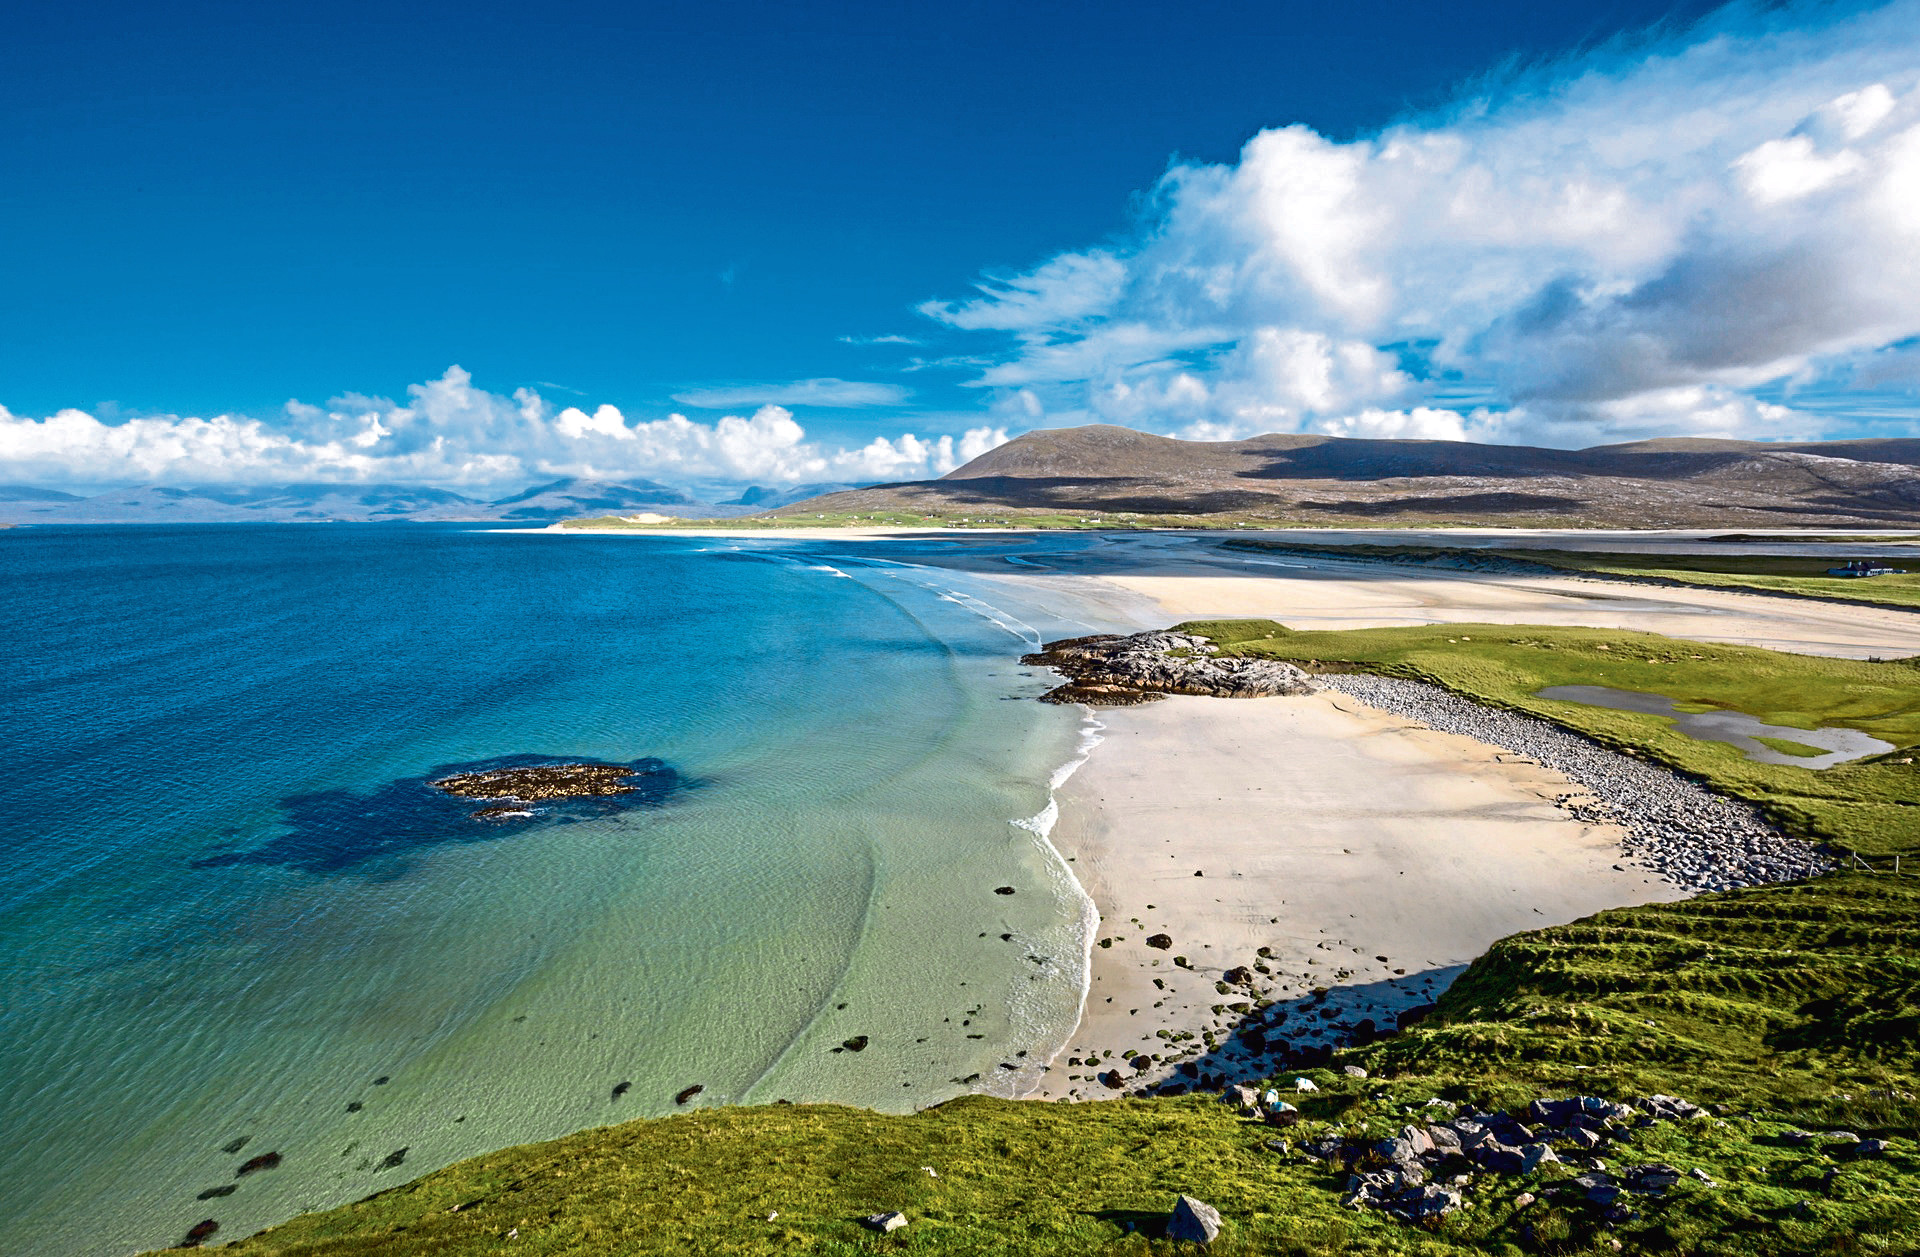 Tourism is important to the Western Isles' economy.